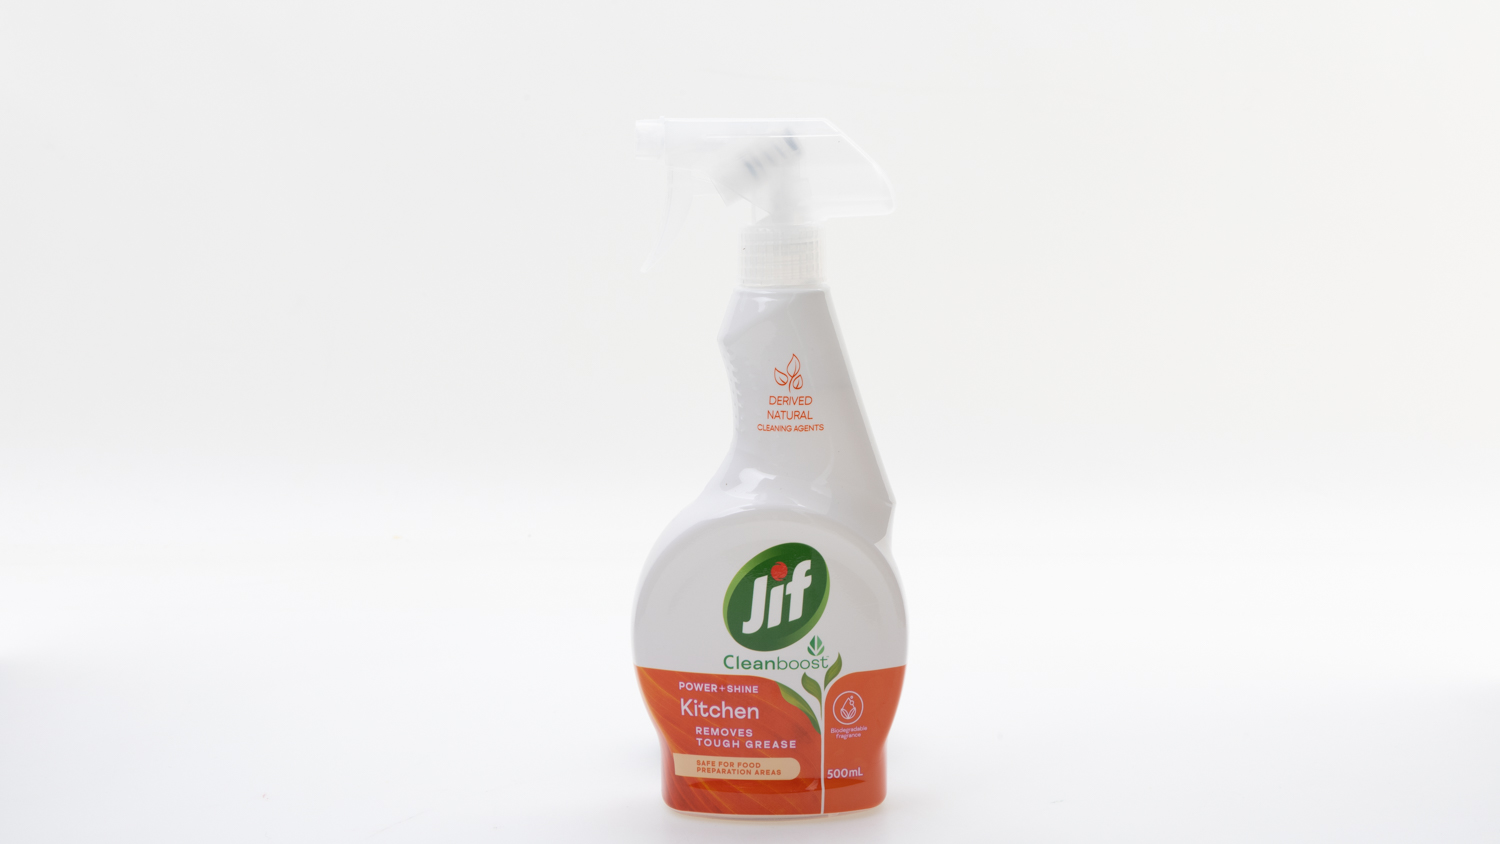 Jif Cleanboost Kitchen carousel image